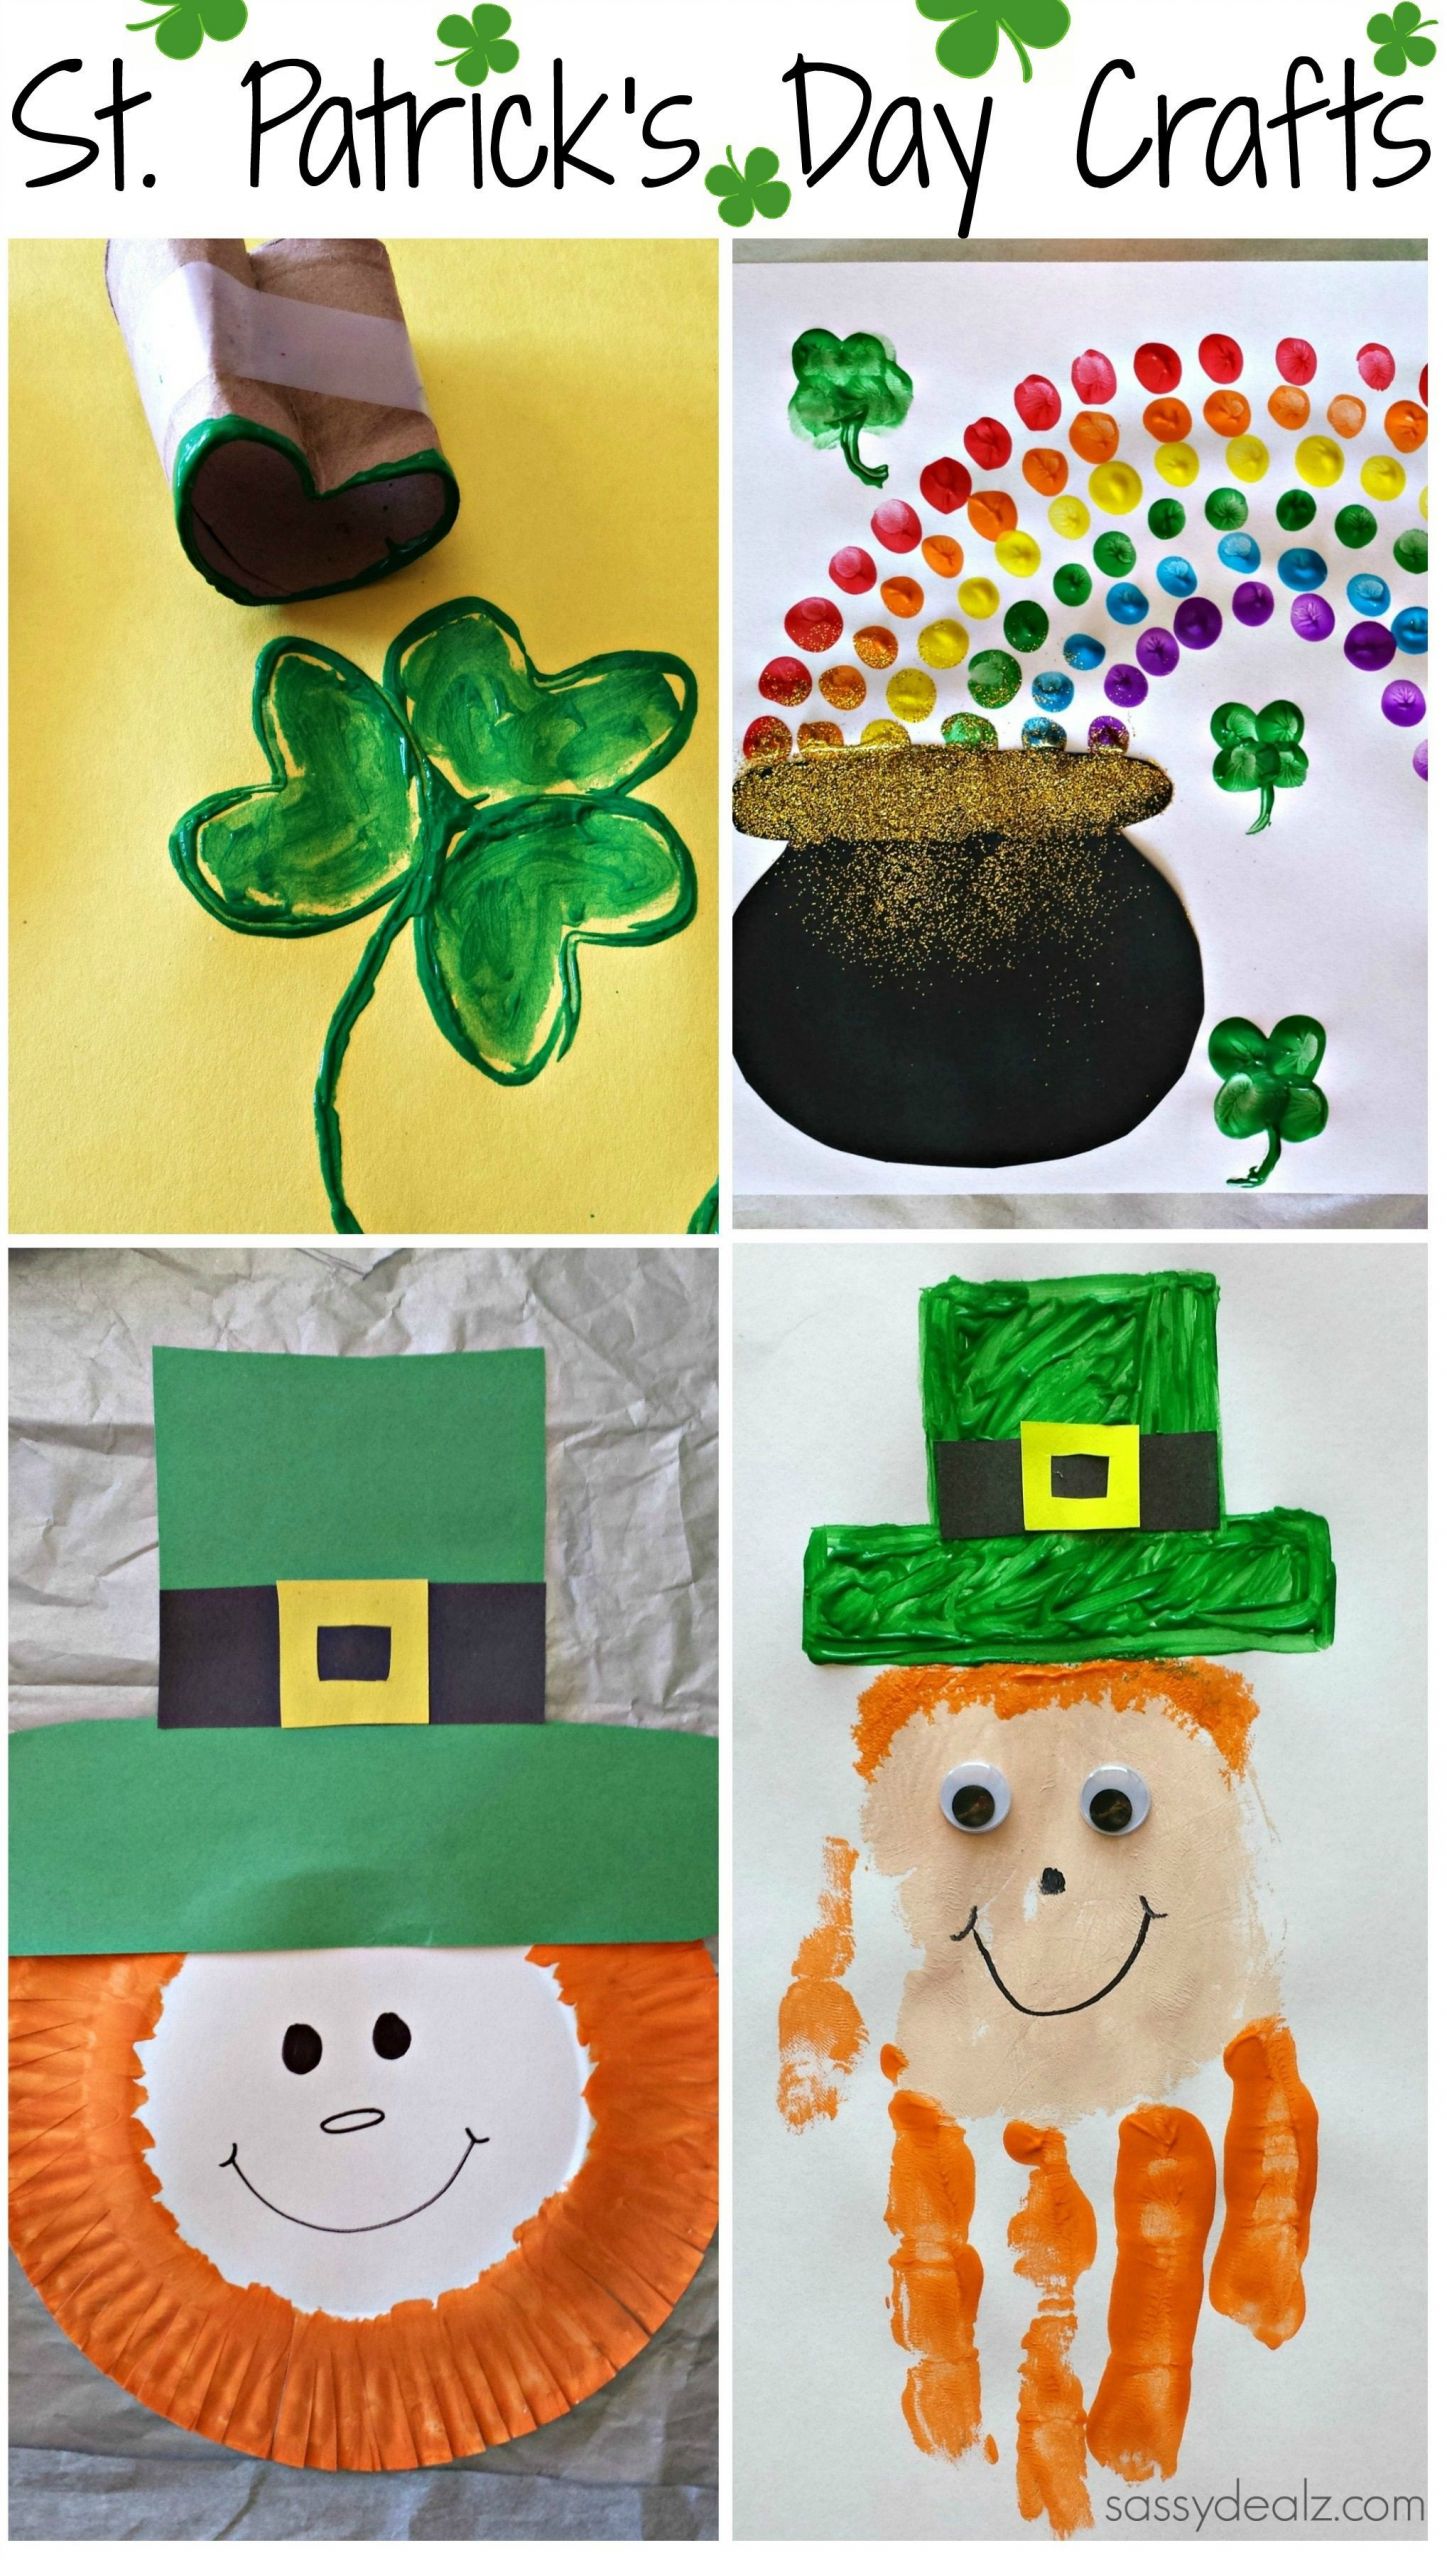 St Patrick Day Art And Crafts For Preschoolers
 Easy St Patrick s Day Crafts For Kids